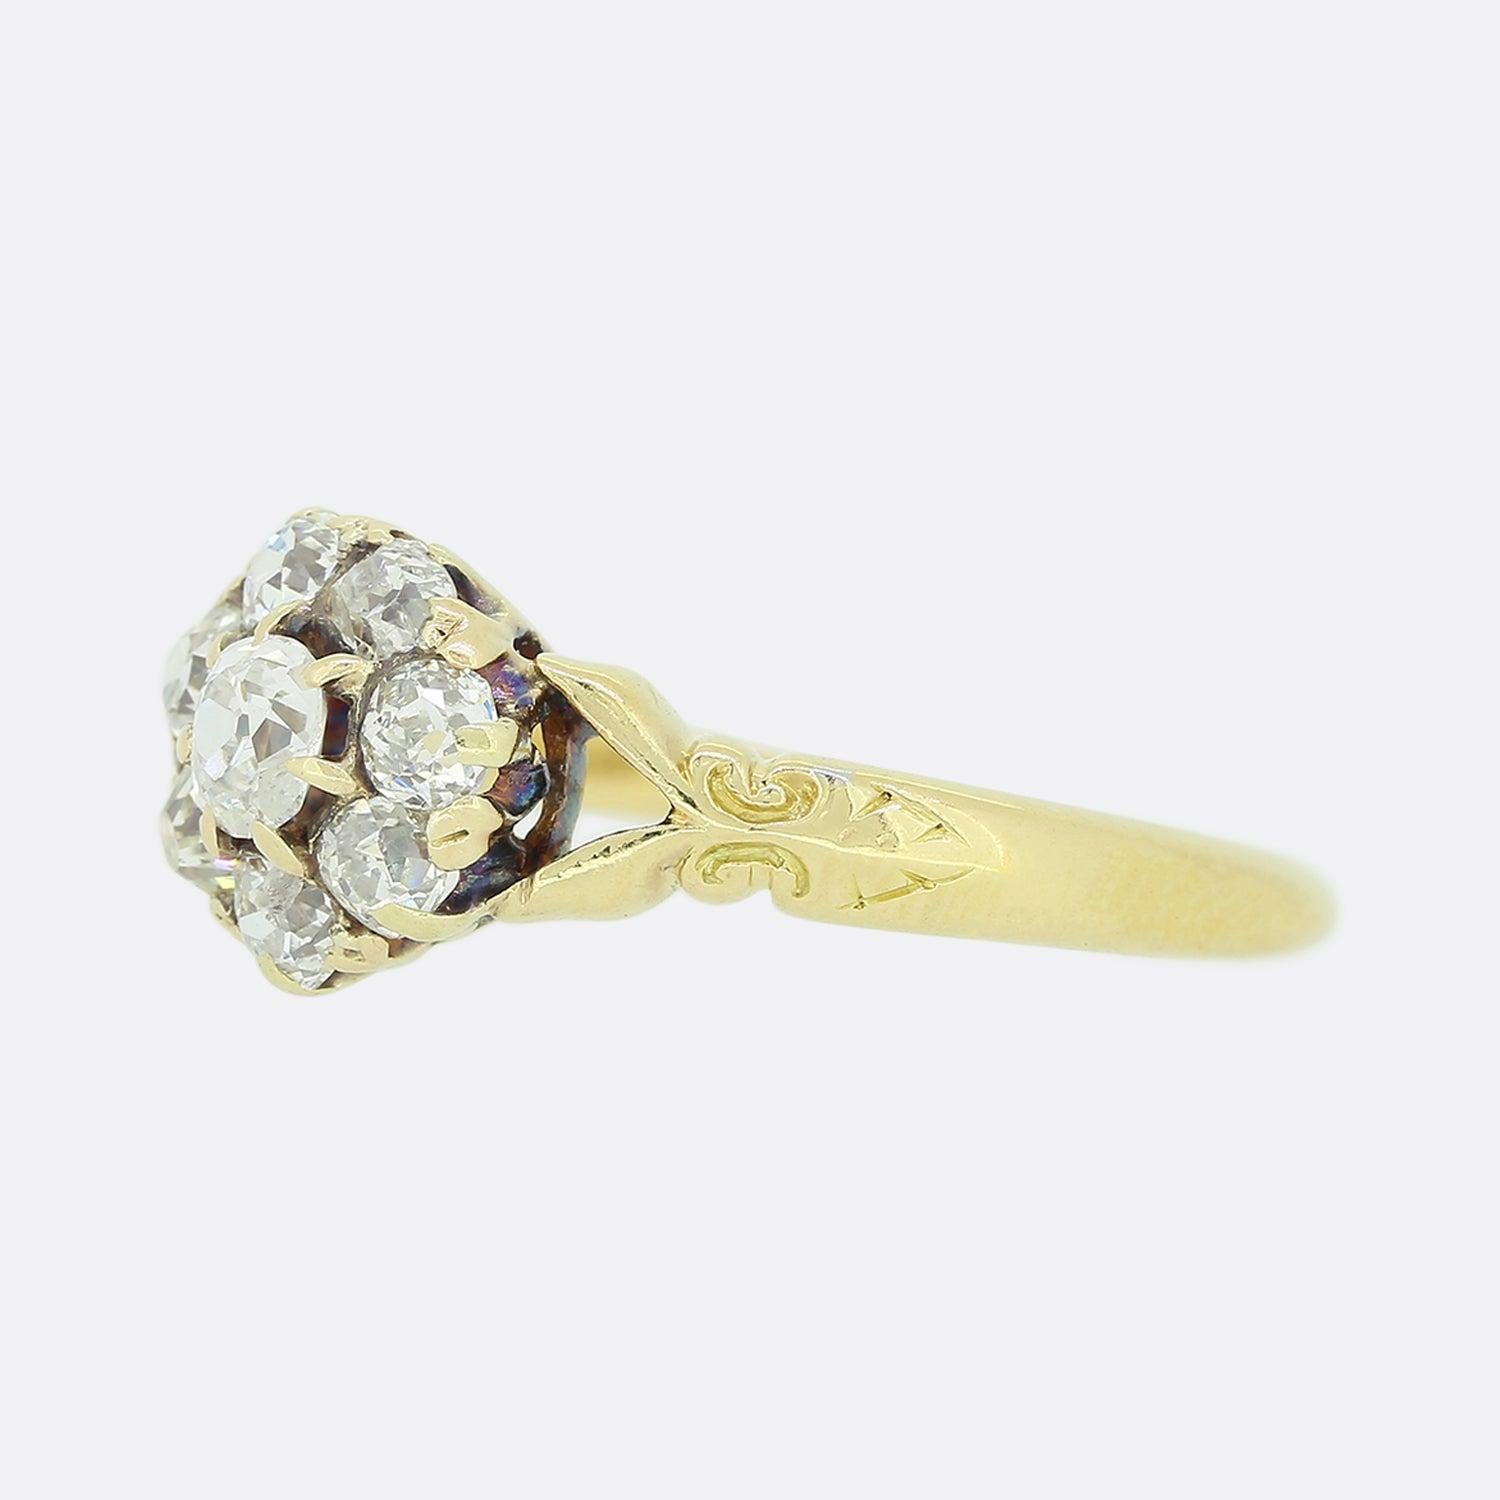 This is a victorian 18ct yellow gold diamond daisy ring. The ring plays host to a cluster of old cut diamonds that circulate a slightly larger oval shaped stone at the centre. Each diamond is claw set and sits between a pair of split open shoulders